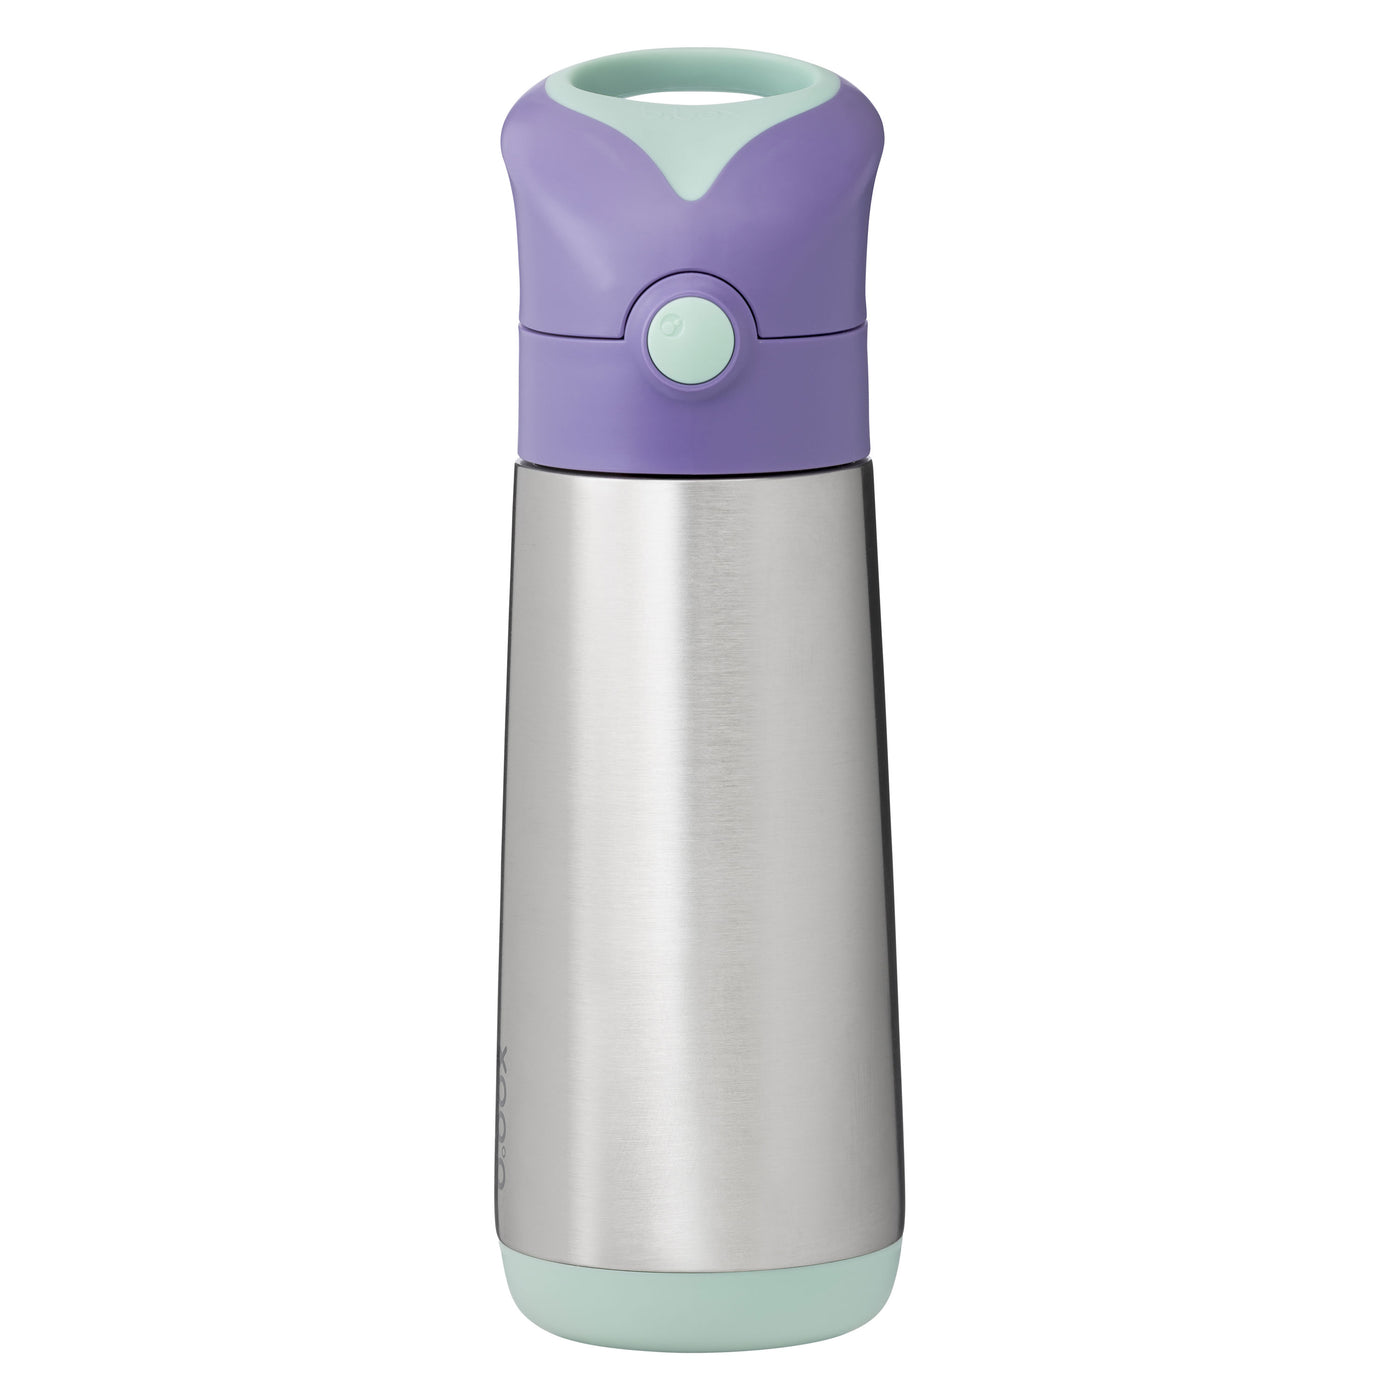 b.box Insulated Drink Bottle - 500ml - Large